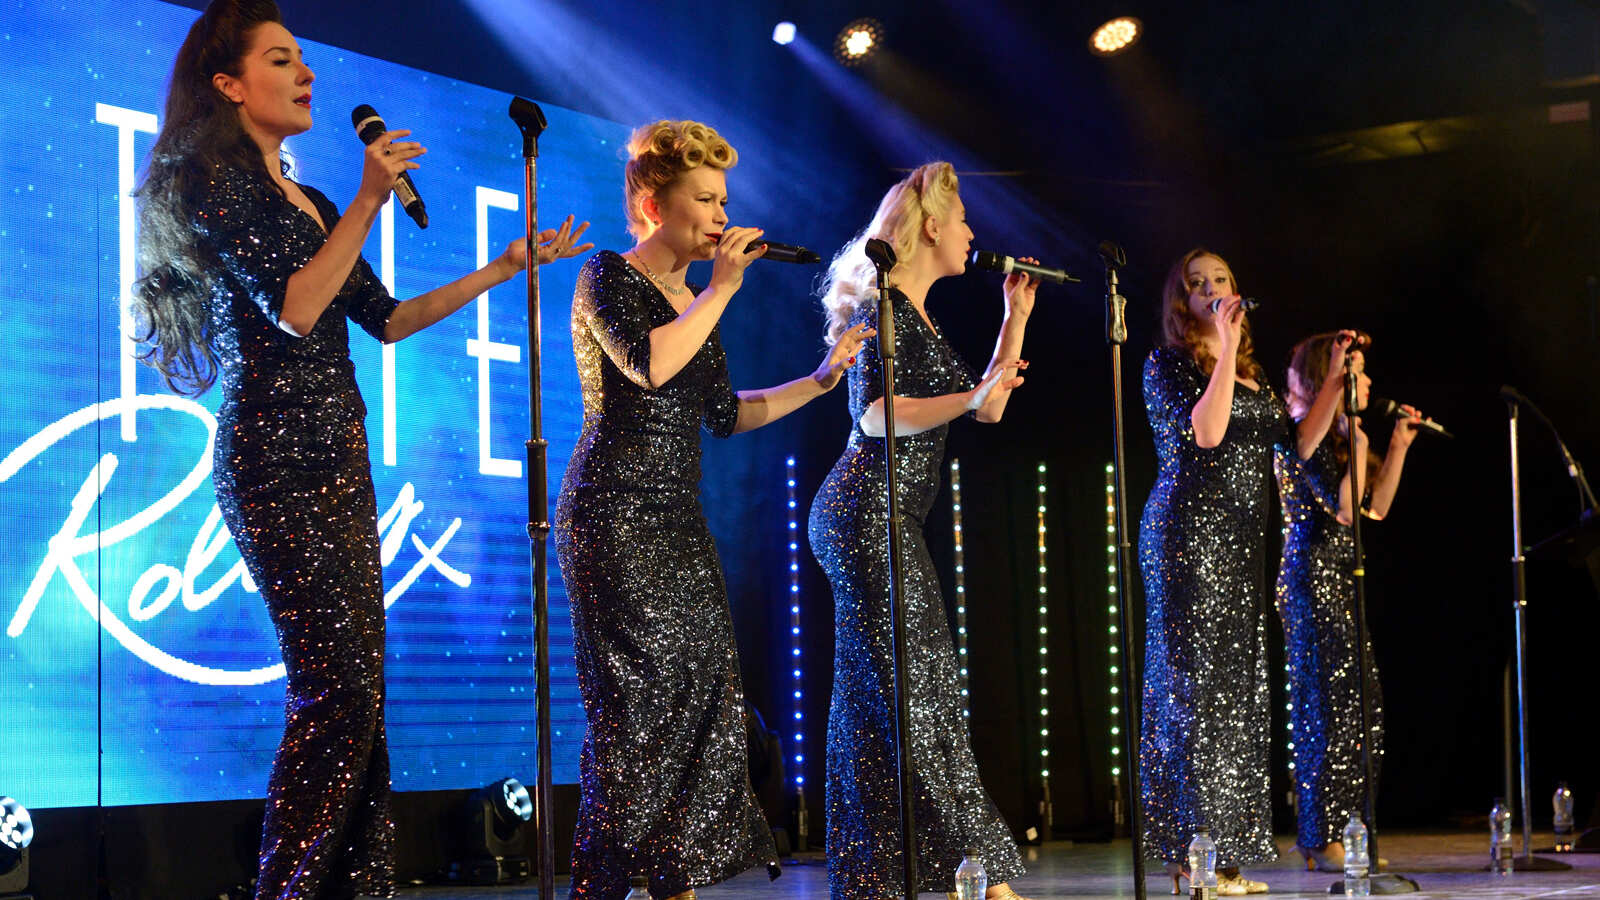 Five singers at glamorous awards event